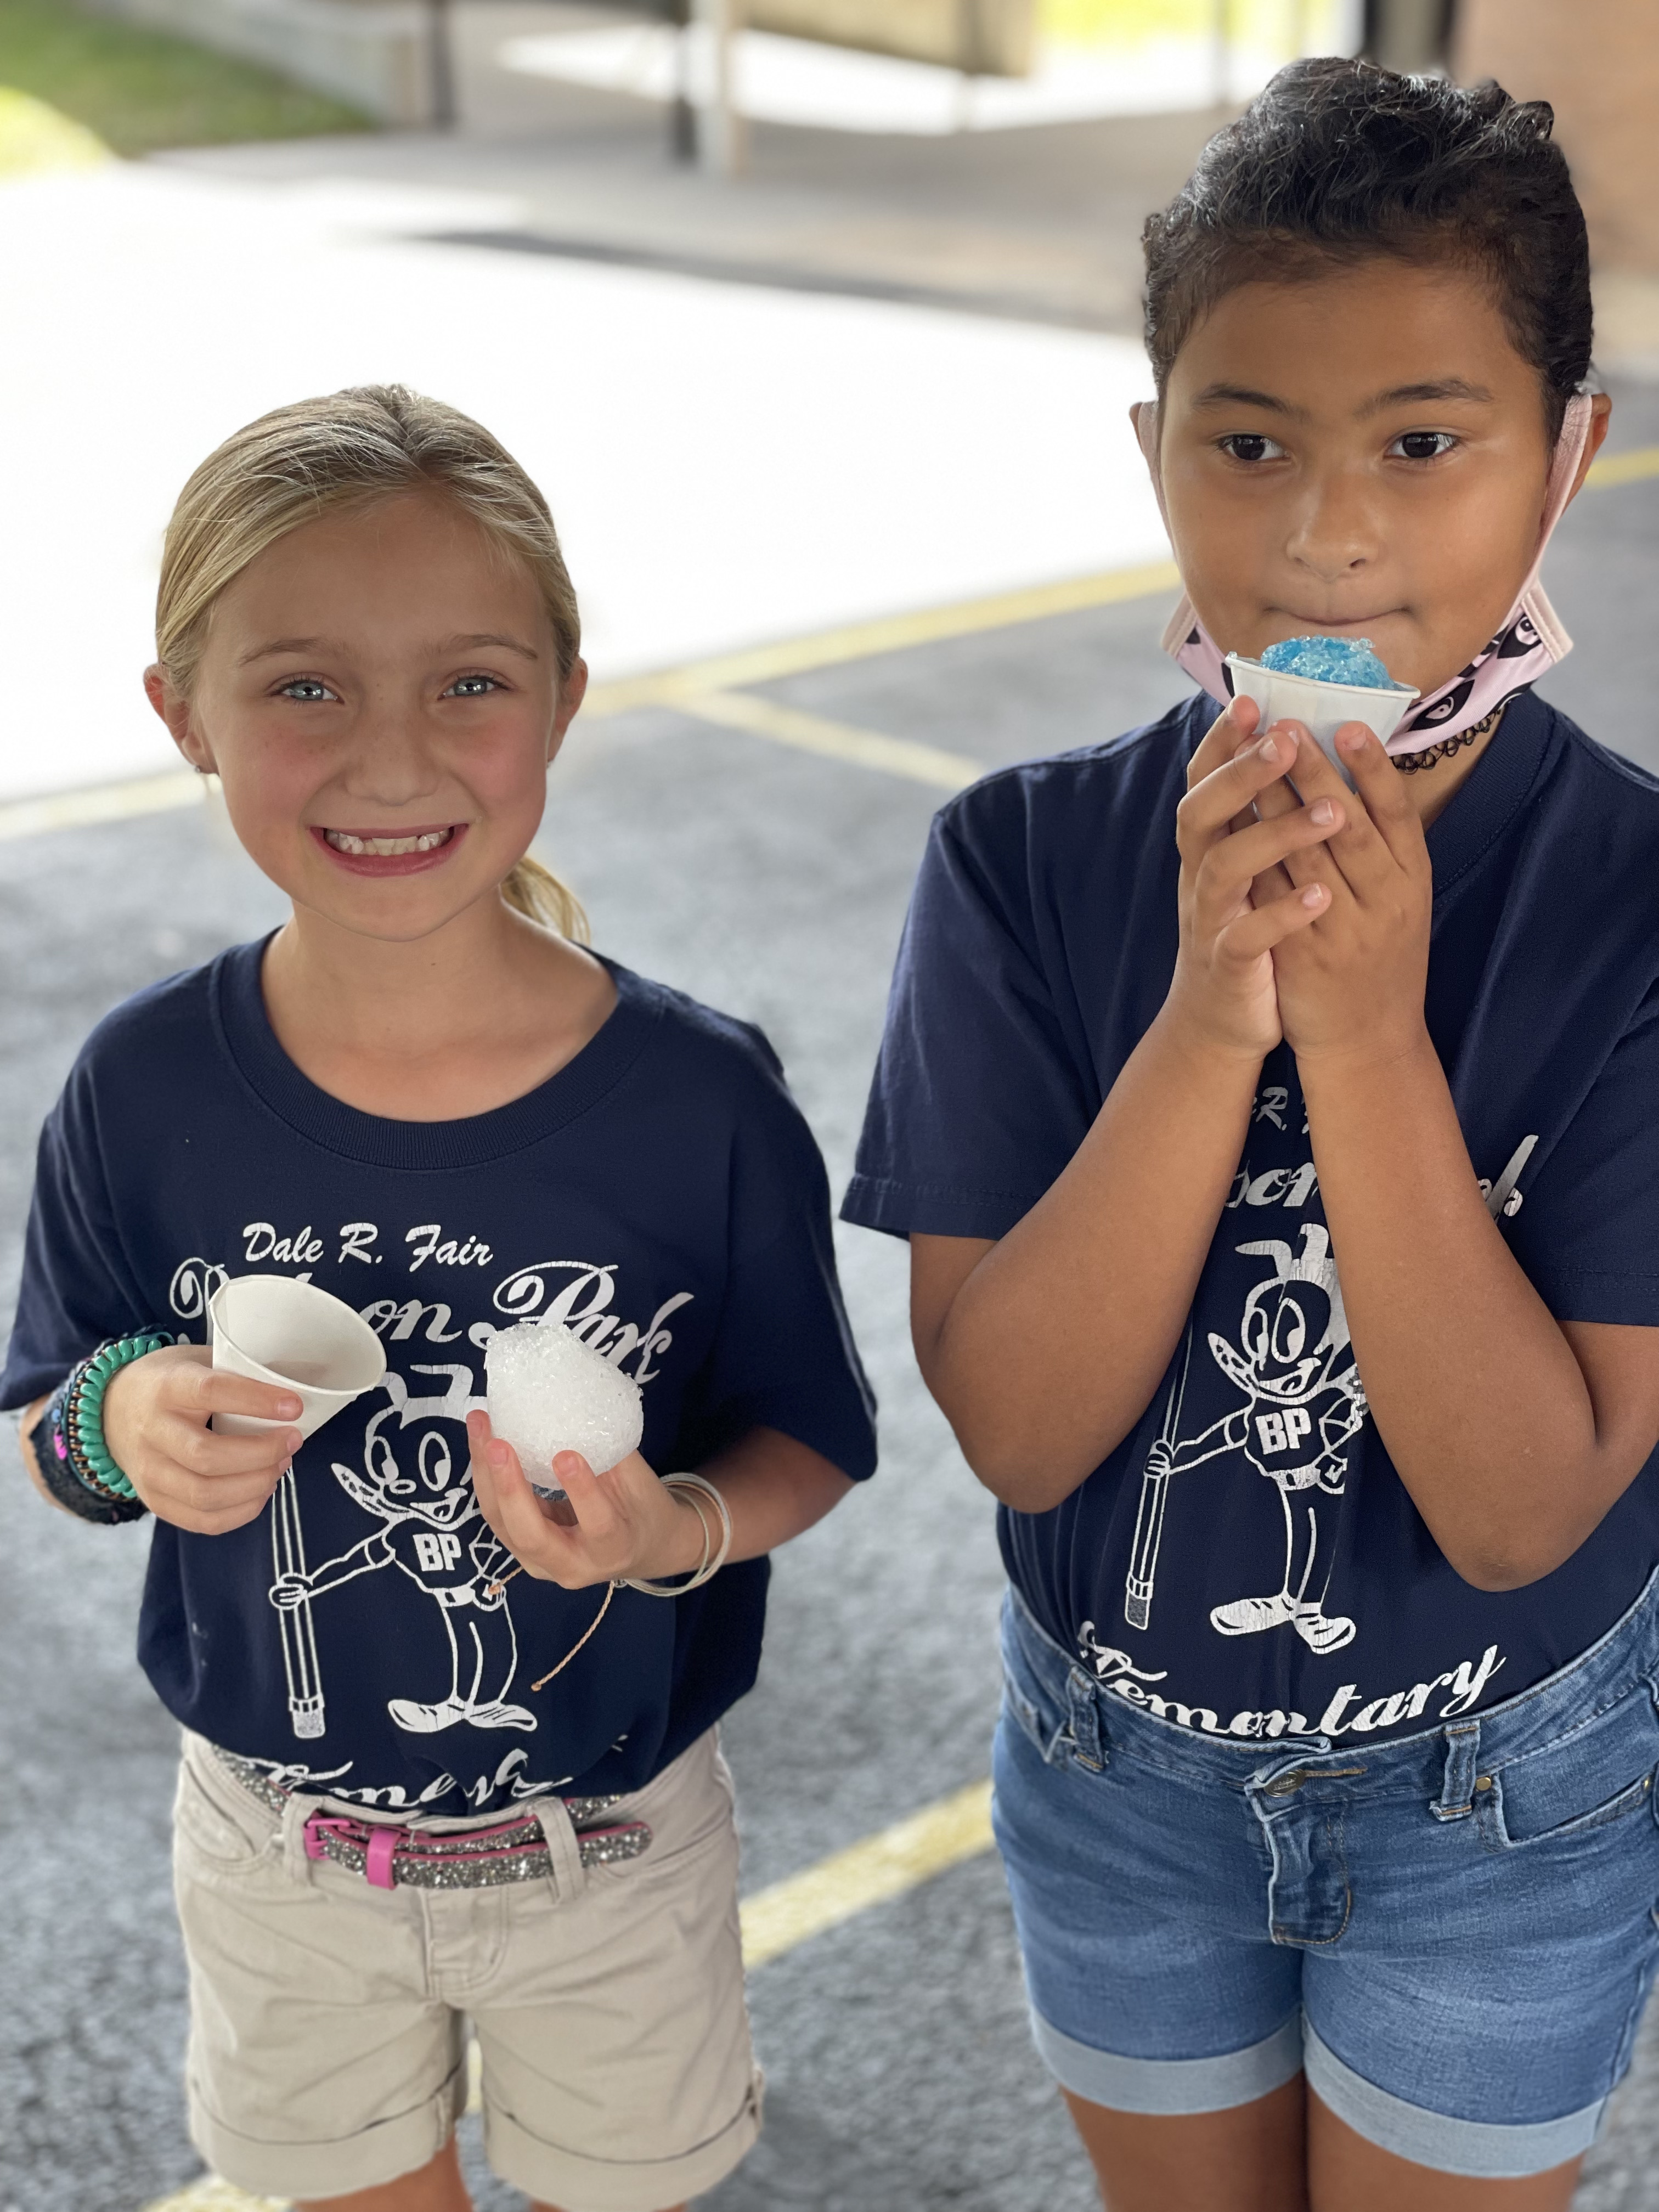 Students eating a snow cone